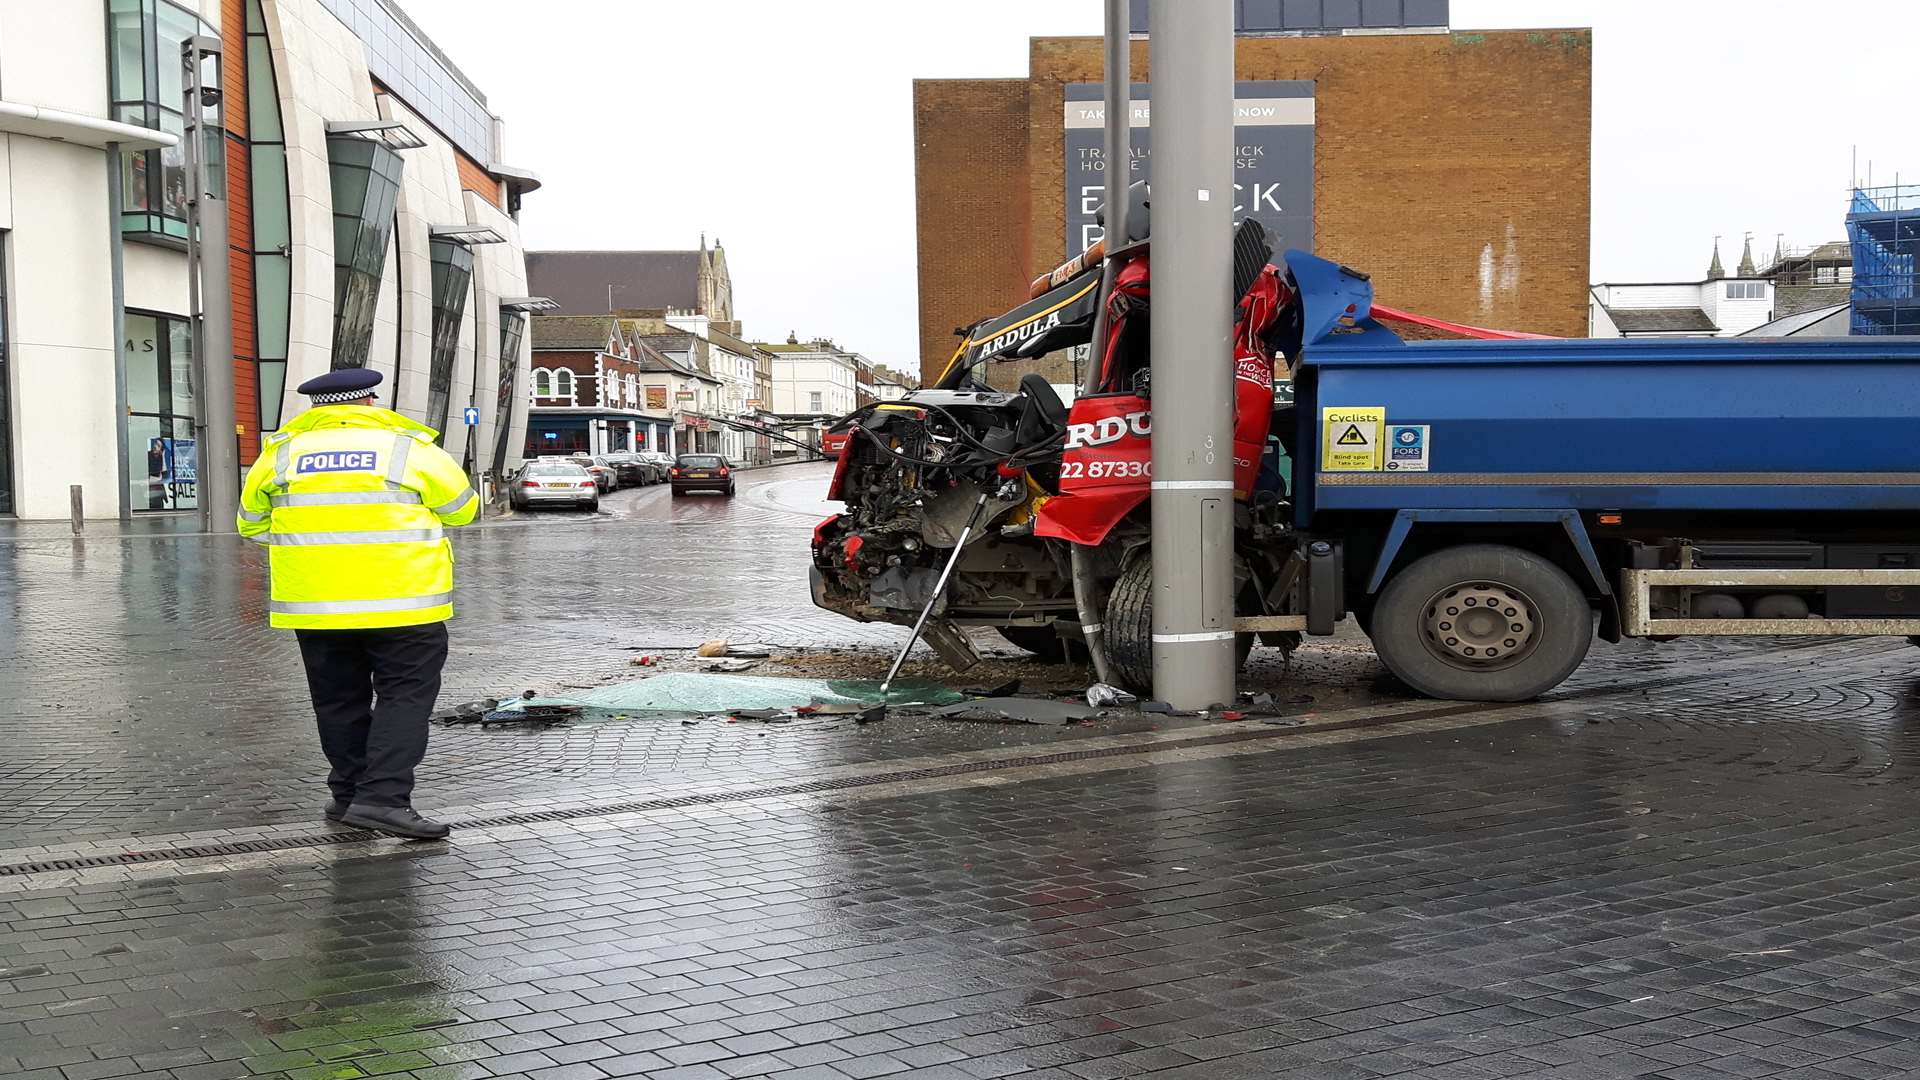 A tipper truck has hit a street light at the bottom on Elwick Road at the junction with Bank Street